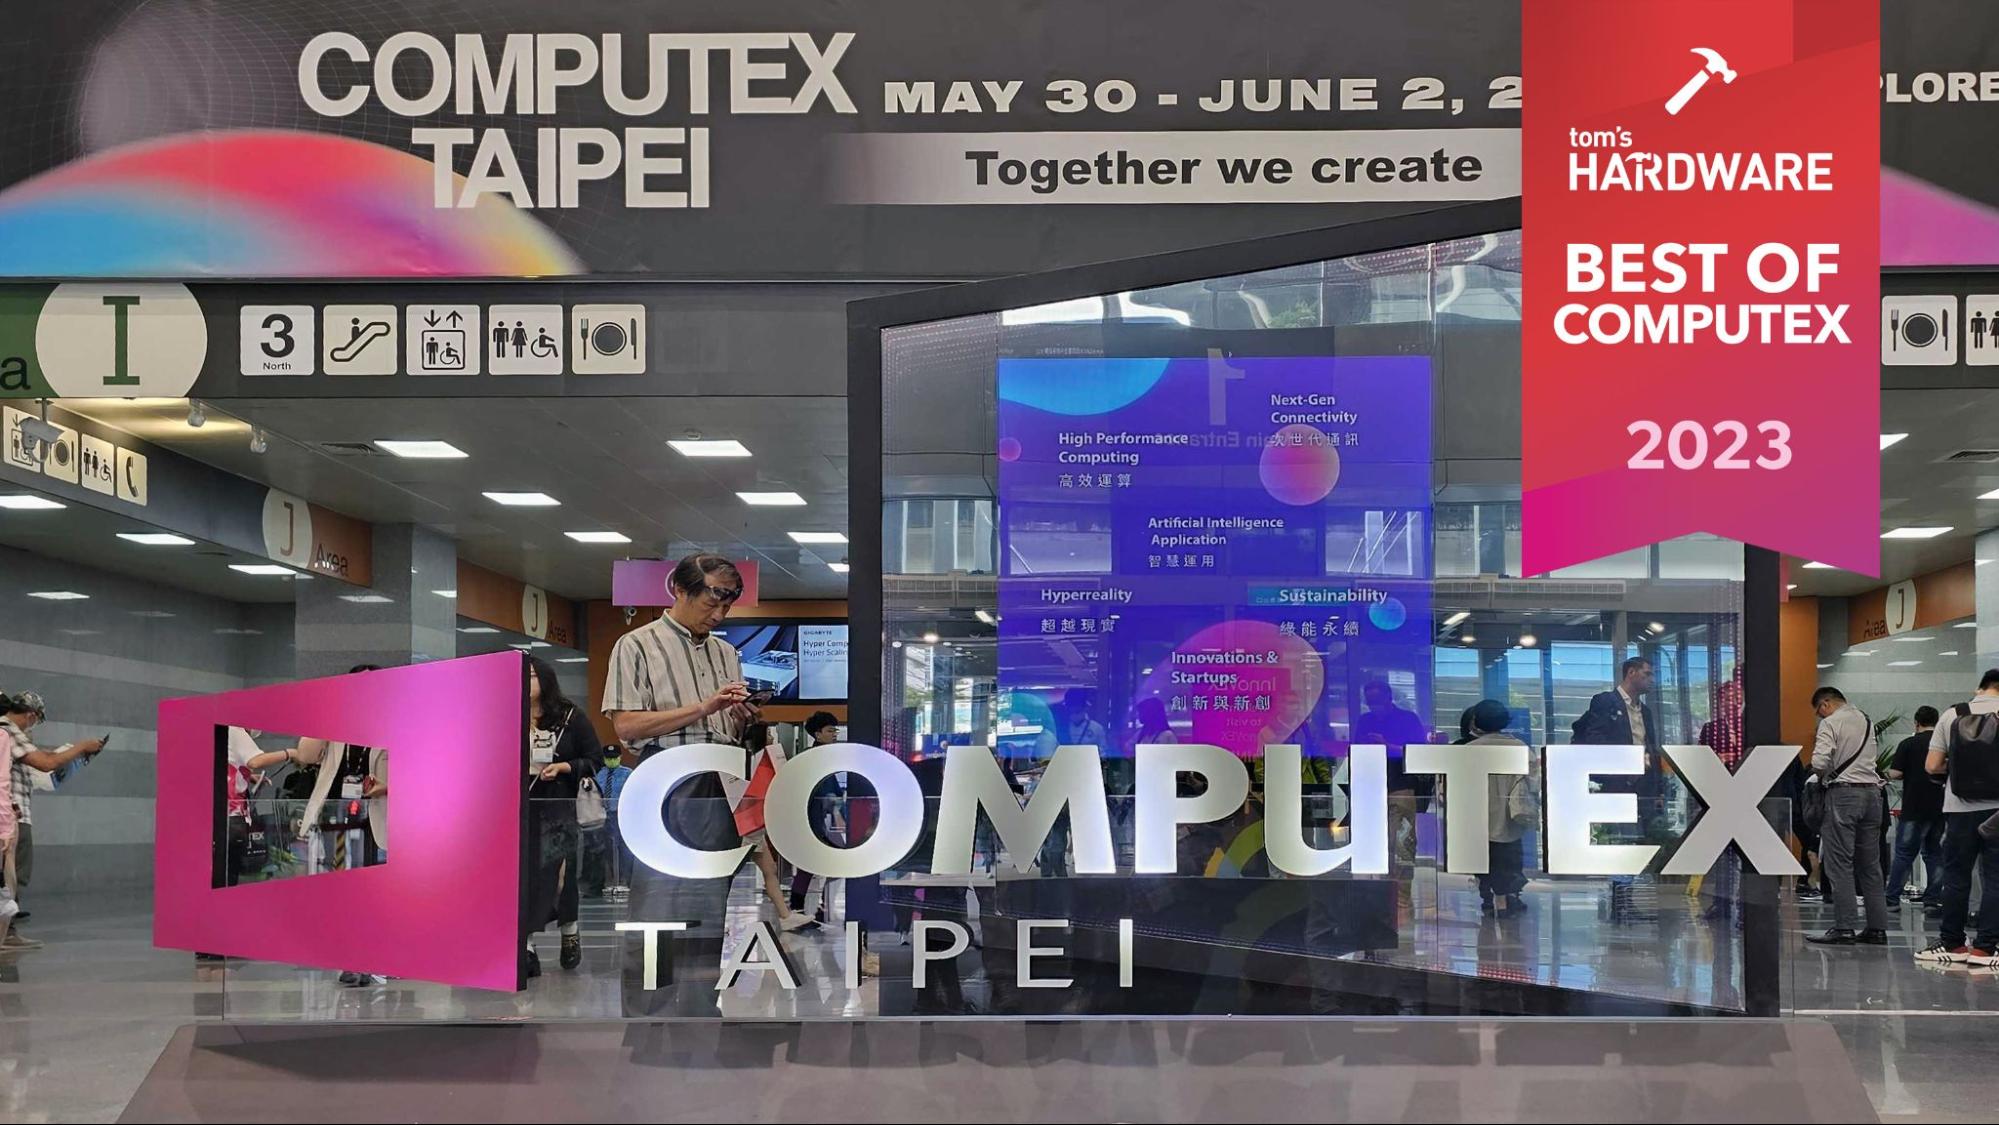 Best of Computex 2023: A Triumph for Today's Top Tech